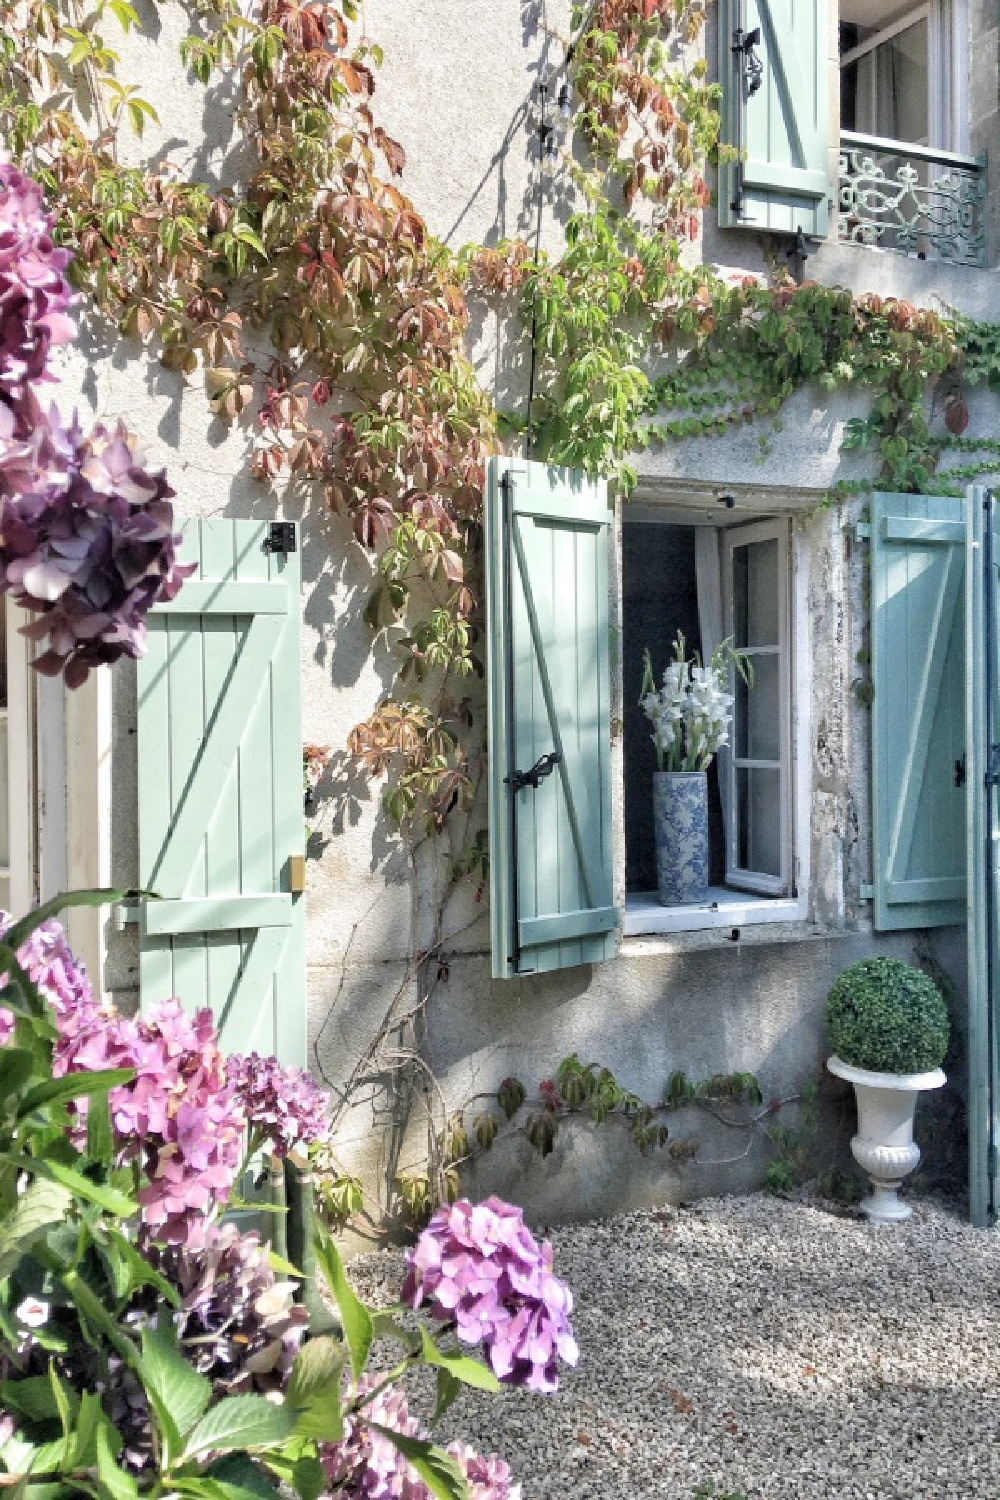 Green shutters on a French farmhouse exterior with climbing vines. #frenchhouses #vivietmargot #greenshutters